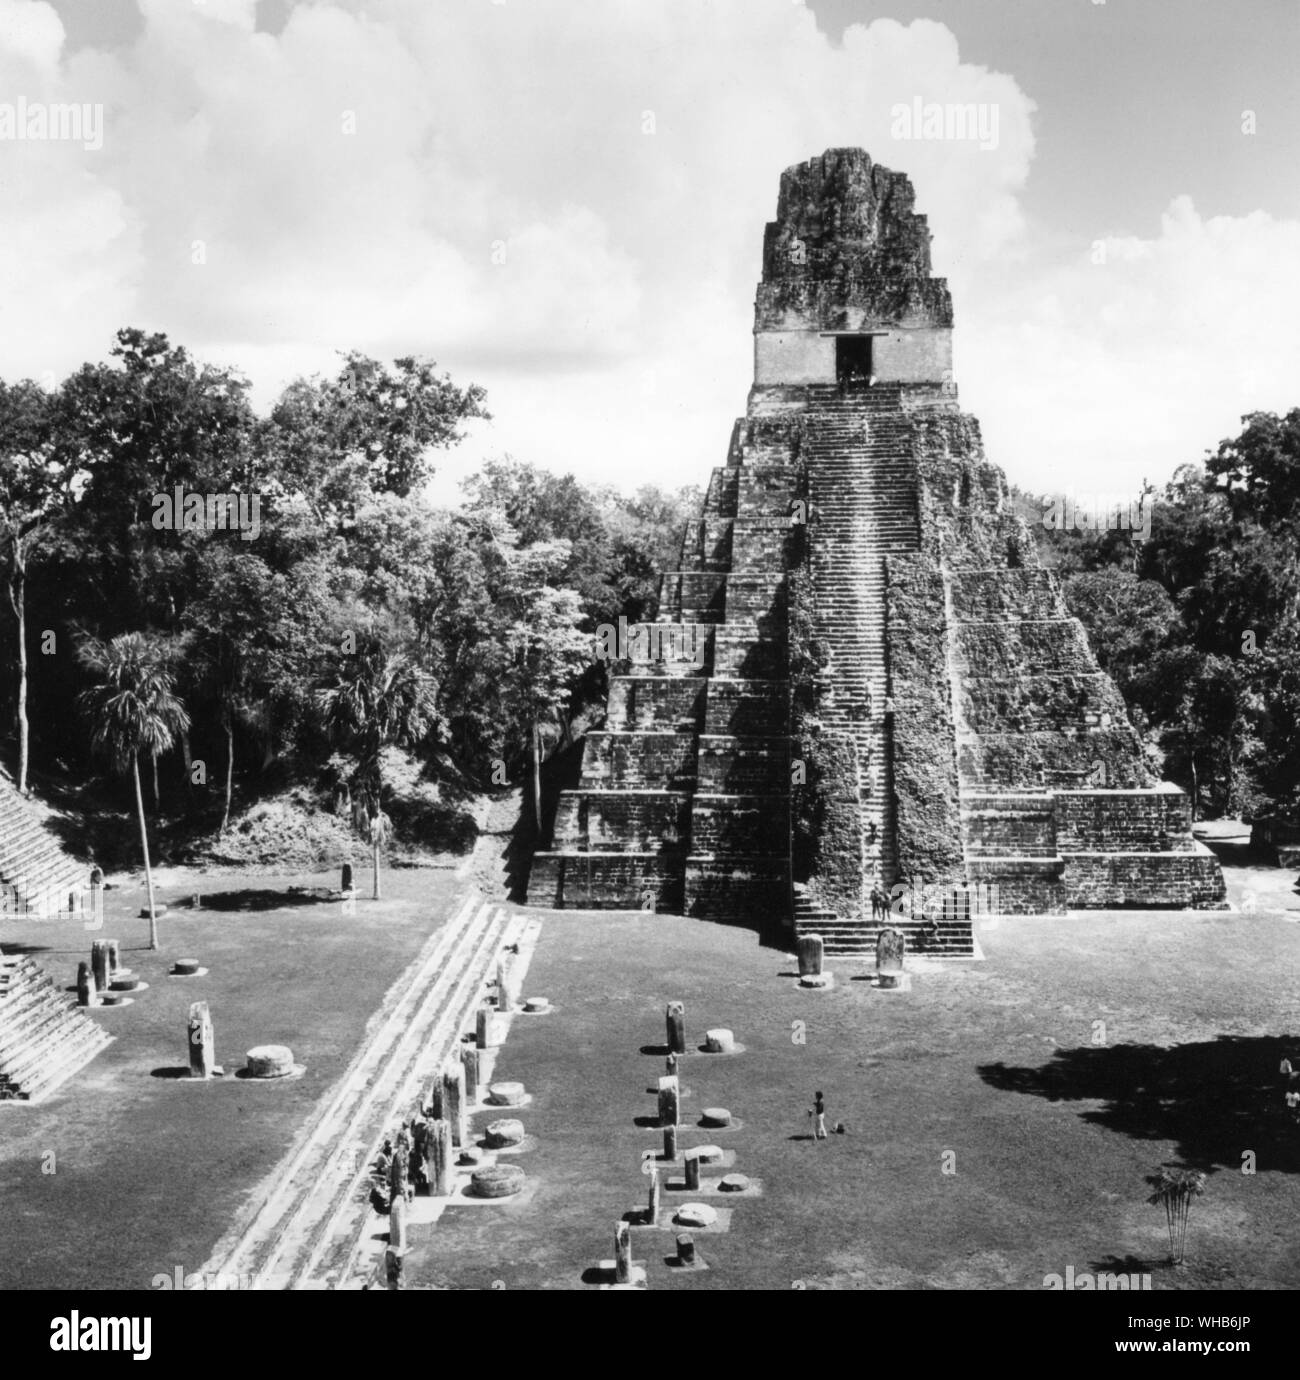 Temple II - Tikal - Guatemala. Tikal (or Tik’al, according to the more current orthography) is the largest of the ancient ruined cities of the Maya civilization. It is located in the El Petén department of Guatemala. Now part of Guatemala's Tikal National Park, it is a UNESCO World Heritage Site and a popular tourist spot.. Stock Photo